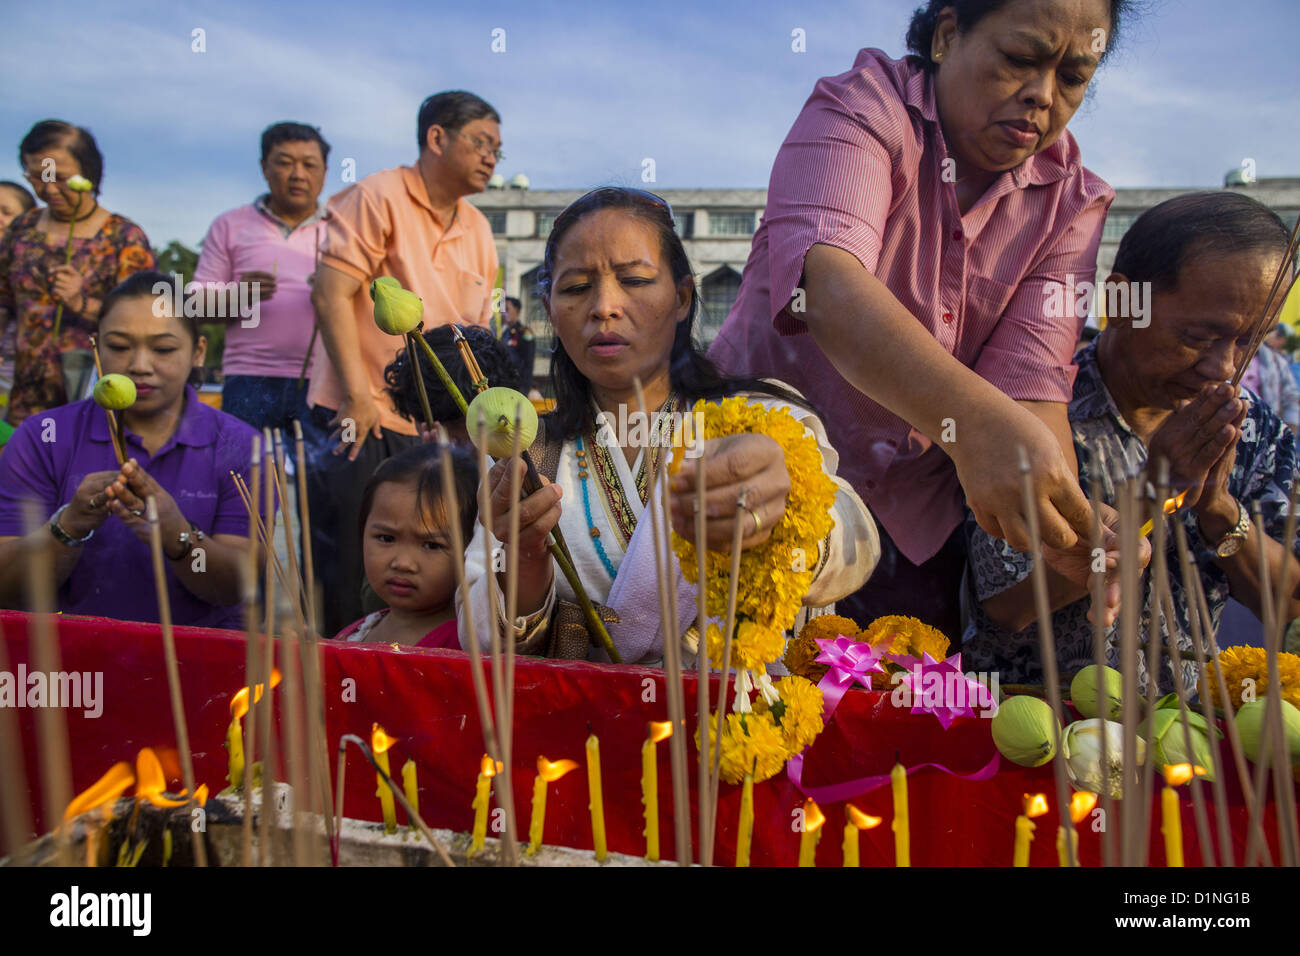 Jan. 1, 2013 - Bangkok, Thailand - People light candles and pray at a shrine during a special merit making ceremony at Bangkok City Hall New Year's morning. Many Thais go to Buddhist temples and shrines to ''make merit'' for the New Year. The traditional Thai New Year is based on the lunar calender and is celebrated in April, but the Gregorian New Year is celebrated throughout the Kingdom. (Credit Image: © Jack Kurtz/ZUMAPRESS.com) Stock Photo